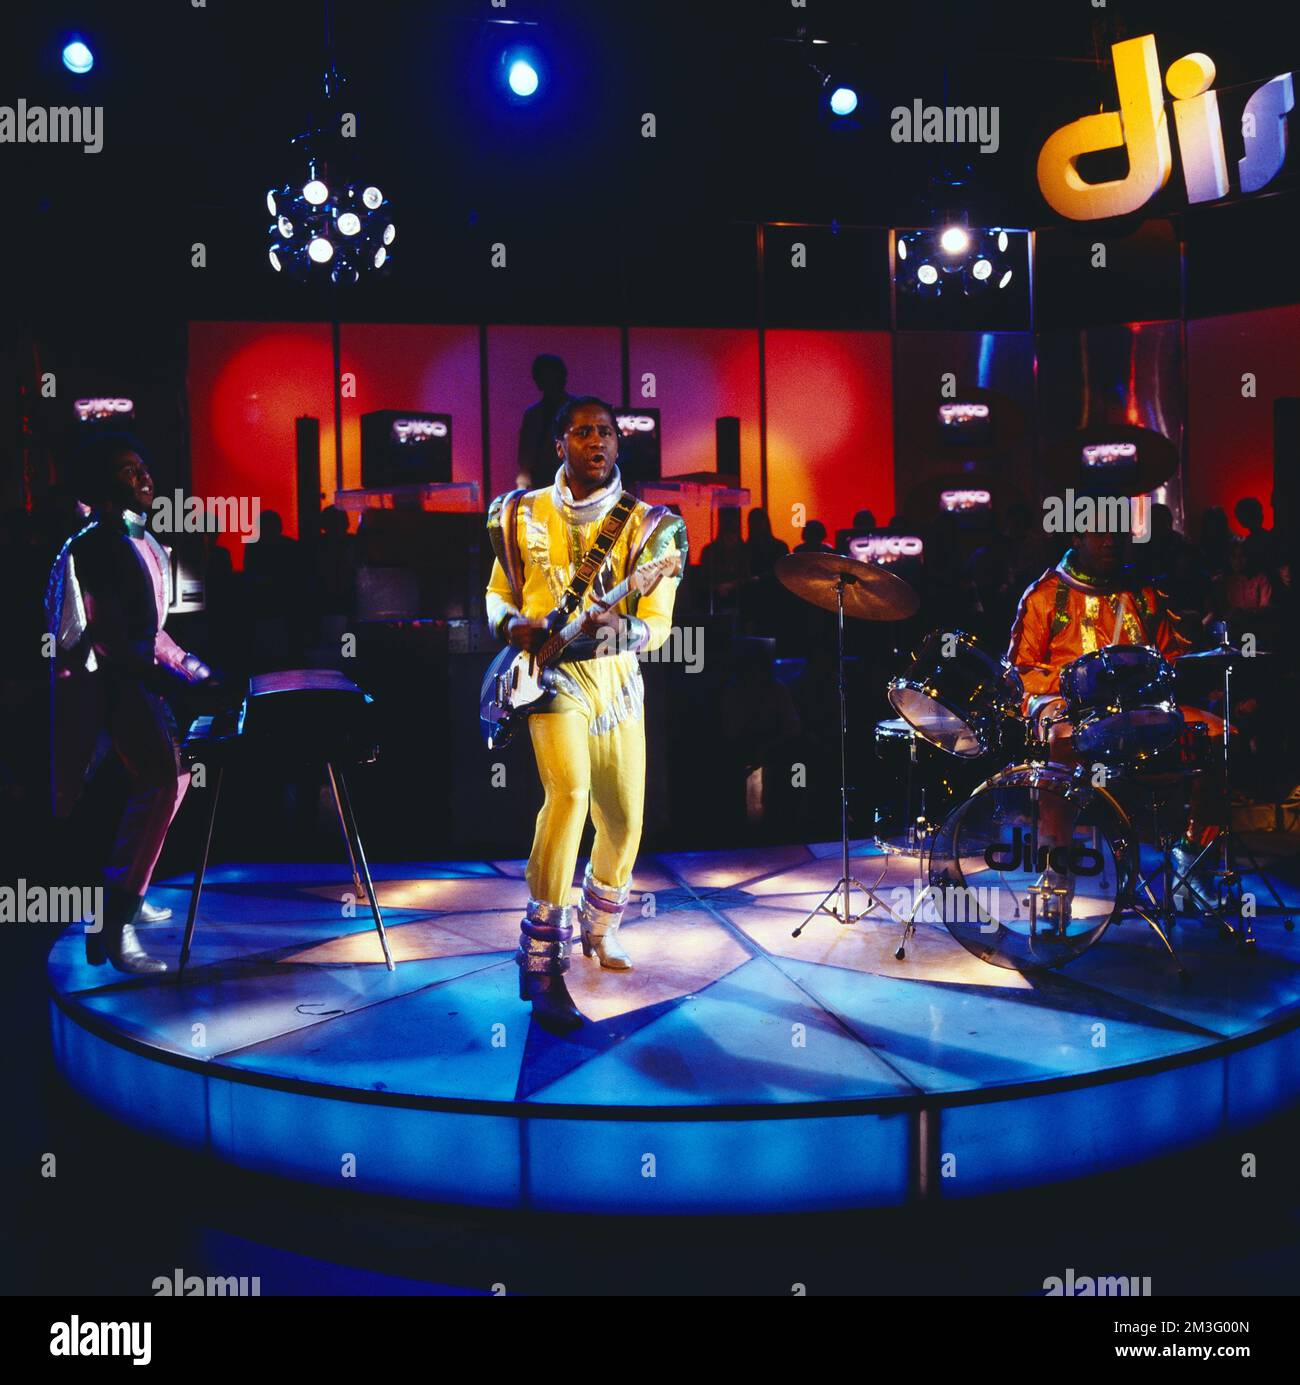 Disco, ZDF Musiksendung, Deutschland, 1980, Gibson Brothers, Pop Trio aus Martinique mit Alexandre Francfort, Keyboarder, Christian Francfort, Sänger, Patrick Francfort, Schlagzeuger. Disco TV music show, Germany, 1980, performance of the Gibson Brothers, Pop trio from Martinique. Stock Photo